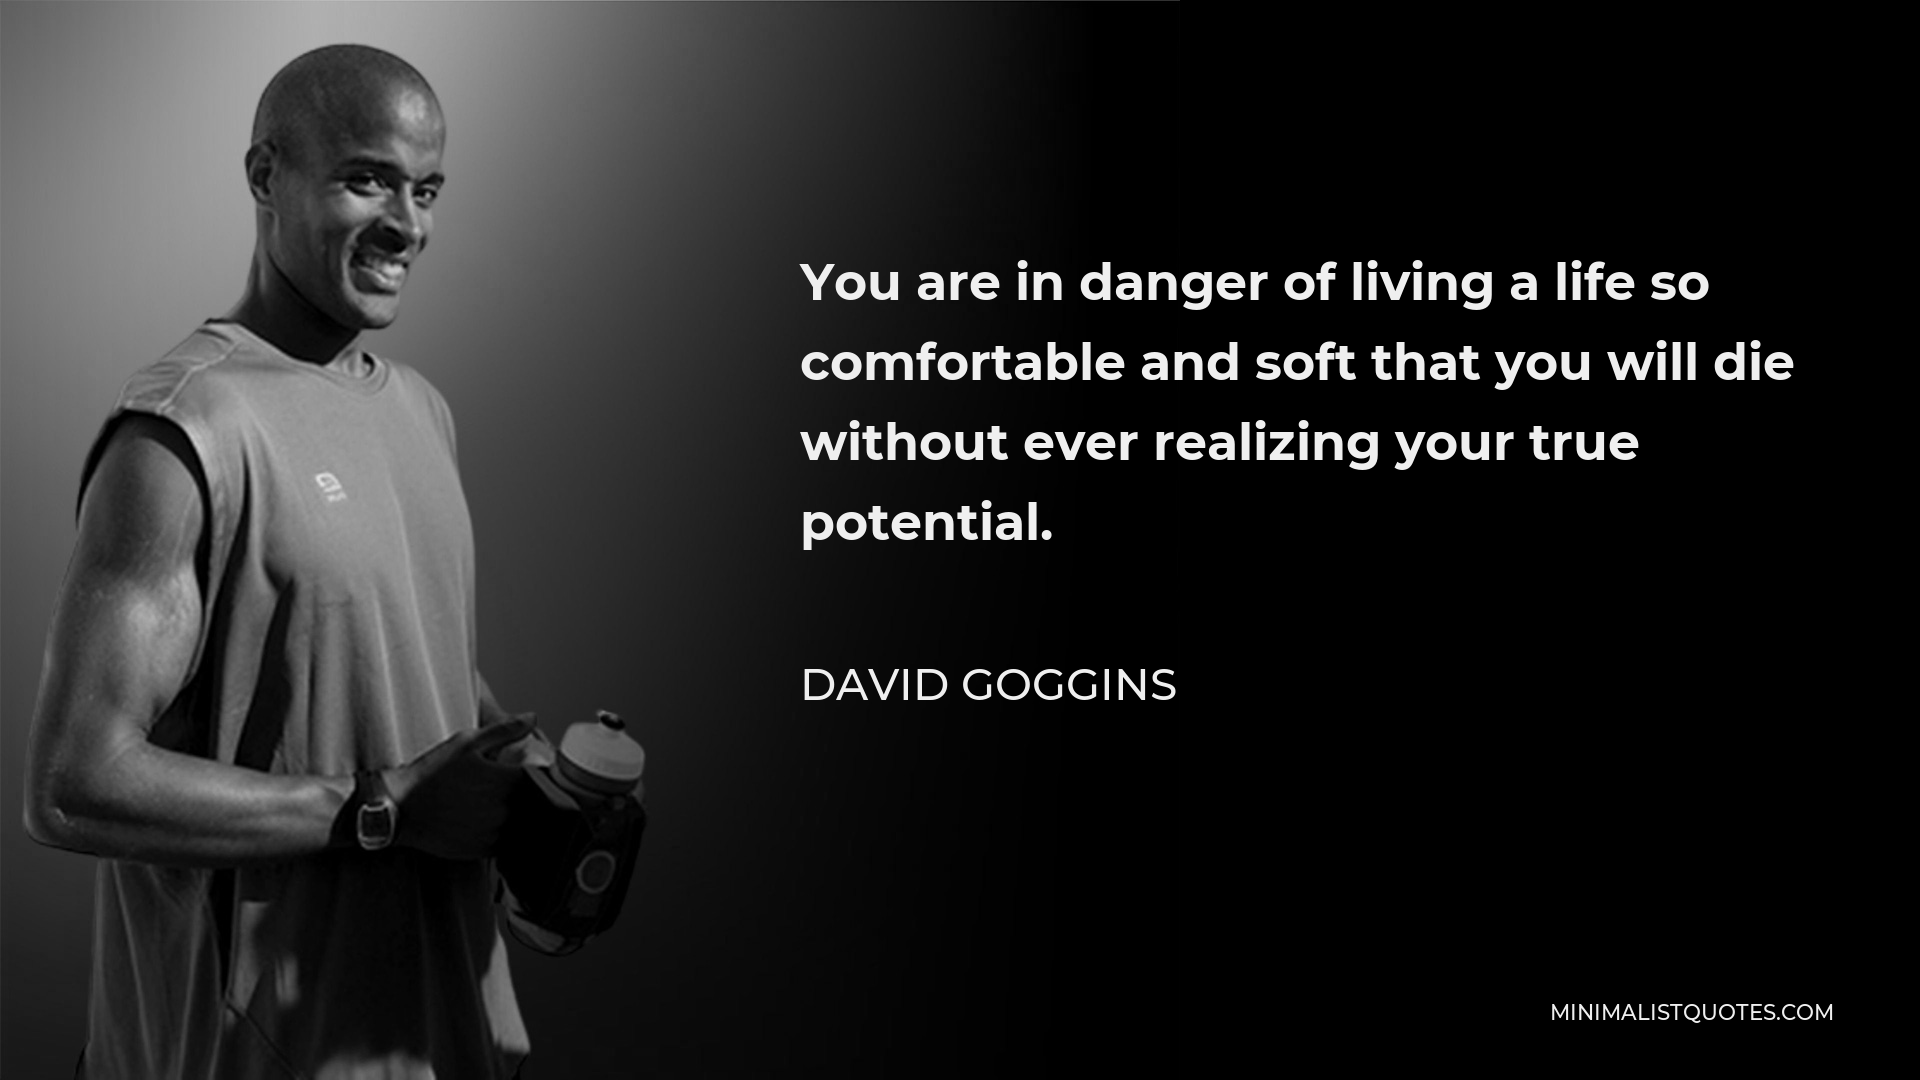 David Goggins Quote: You are in danger of living a life so comfortable and  soft that you will die without ever realizing your true potential.